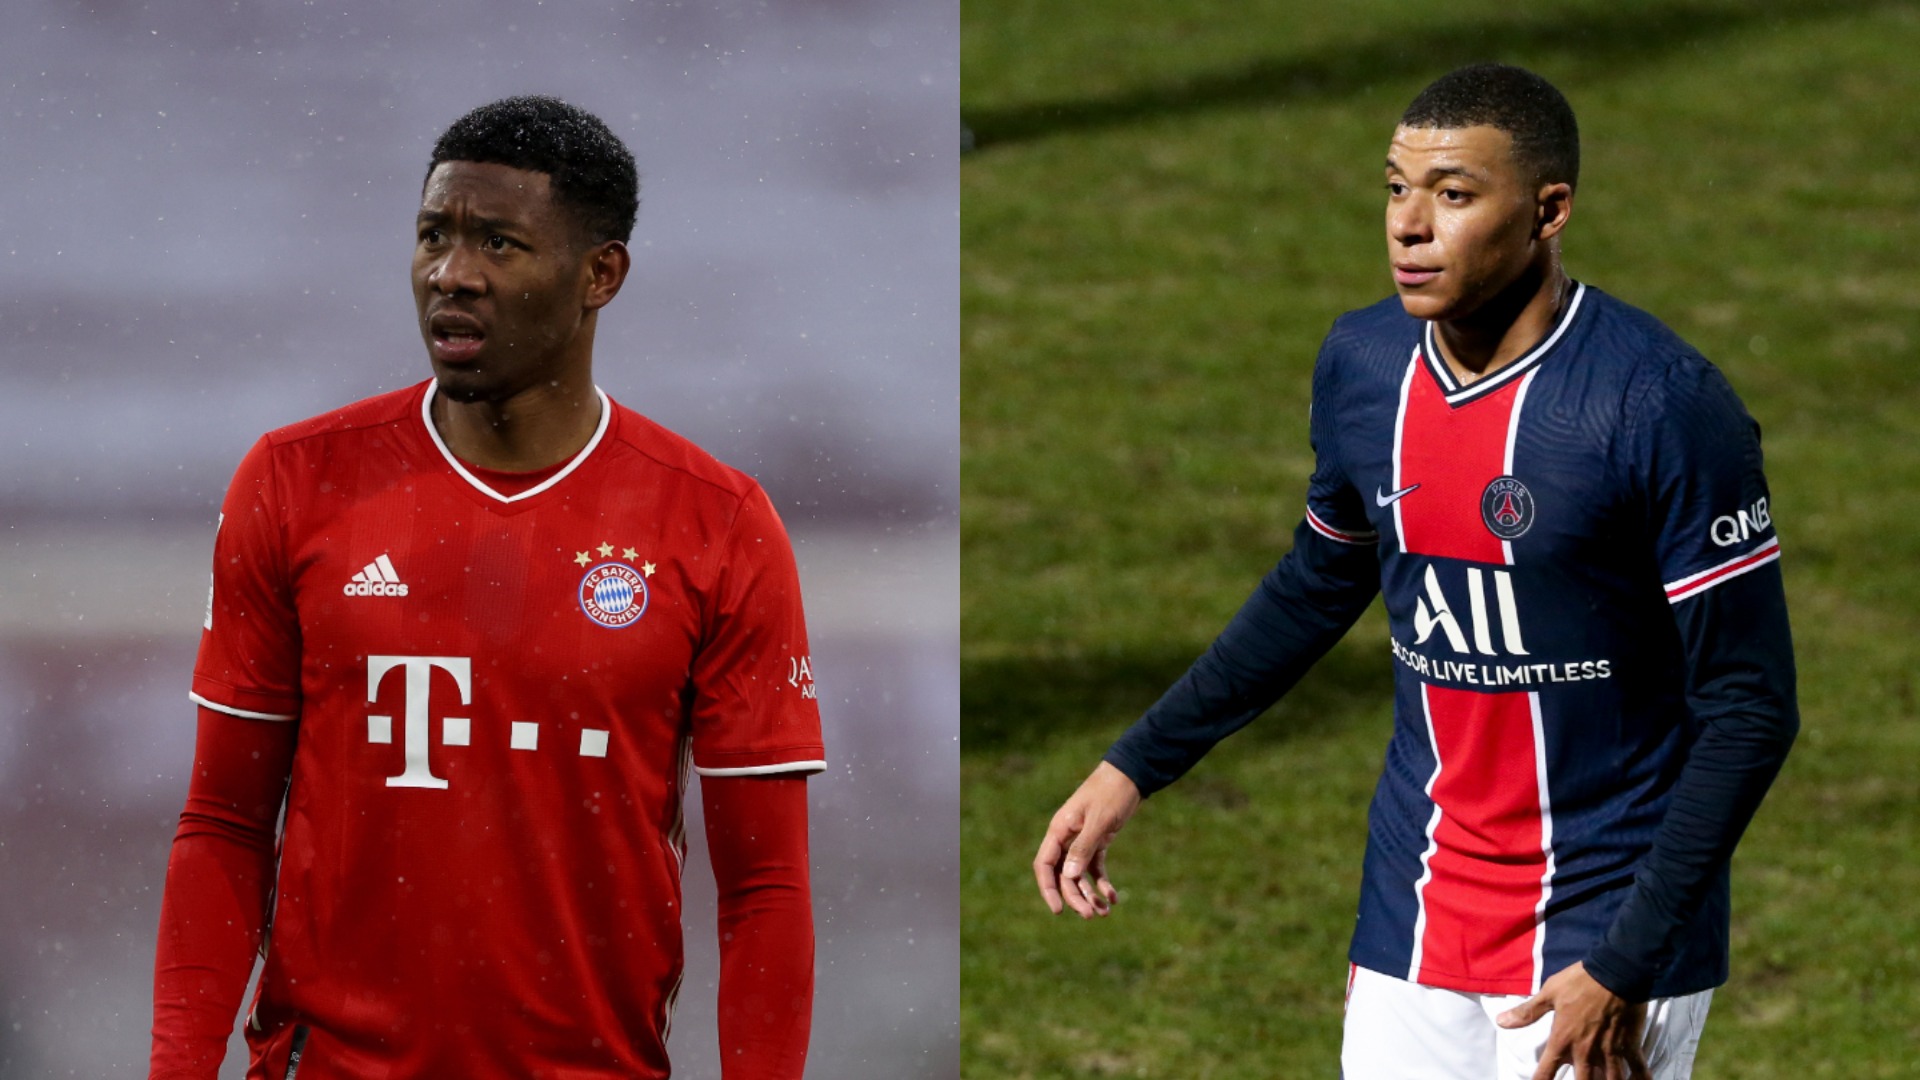 Real Madrid have been linked with moves for Kylian Mbappe and David Alaba, and the rumours were put to Zinedine Zidane on Tuesday.